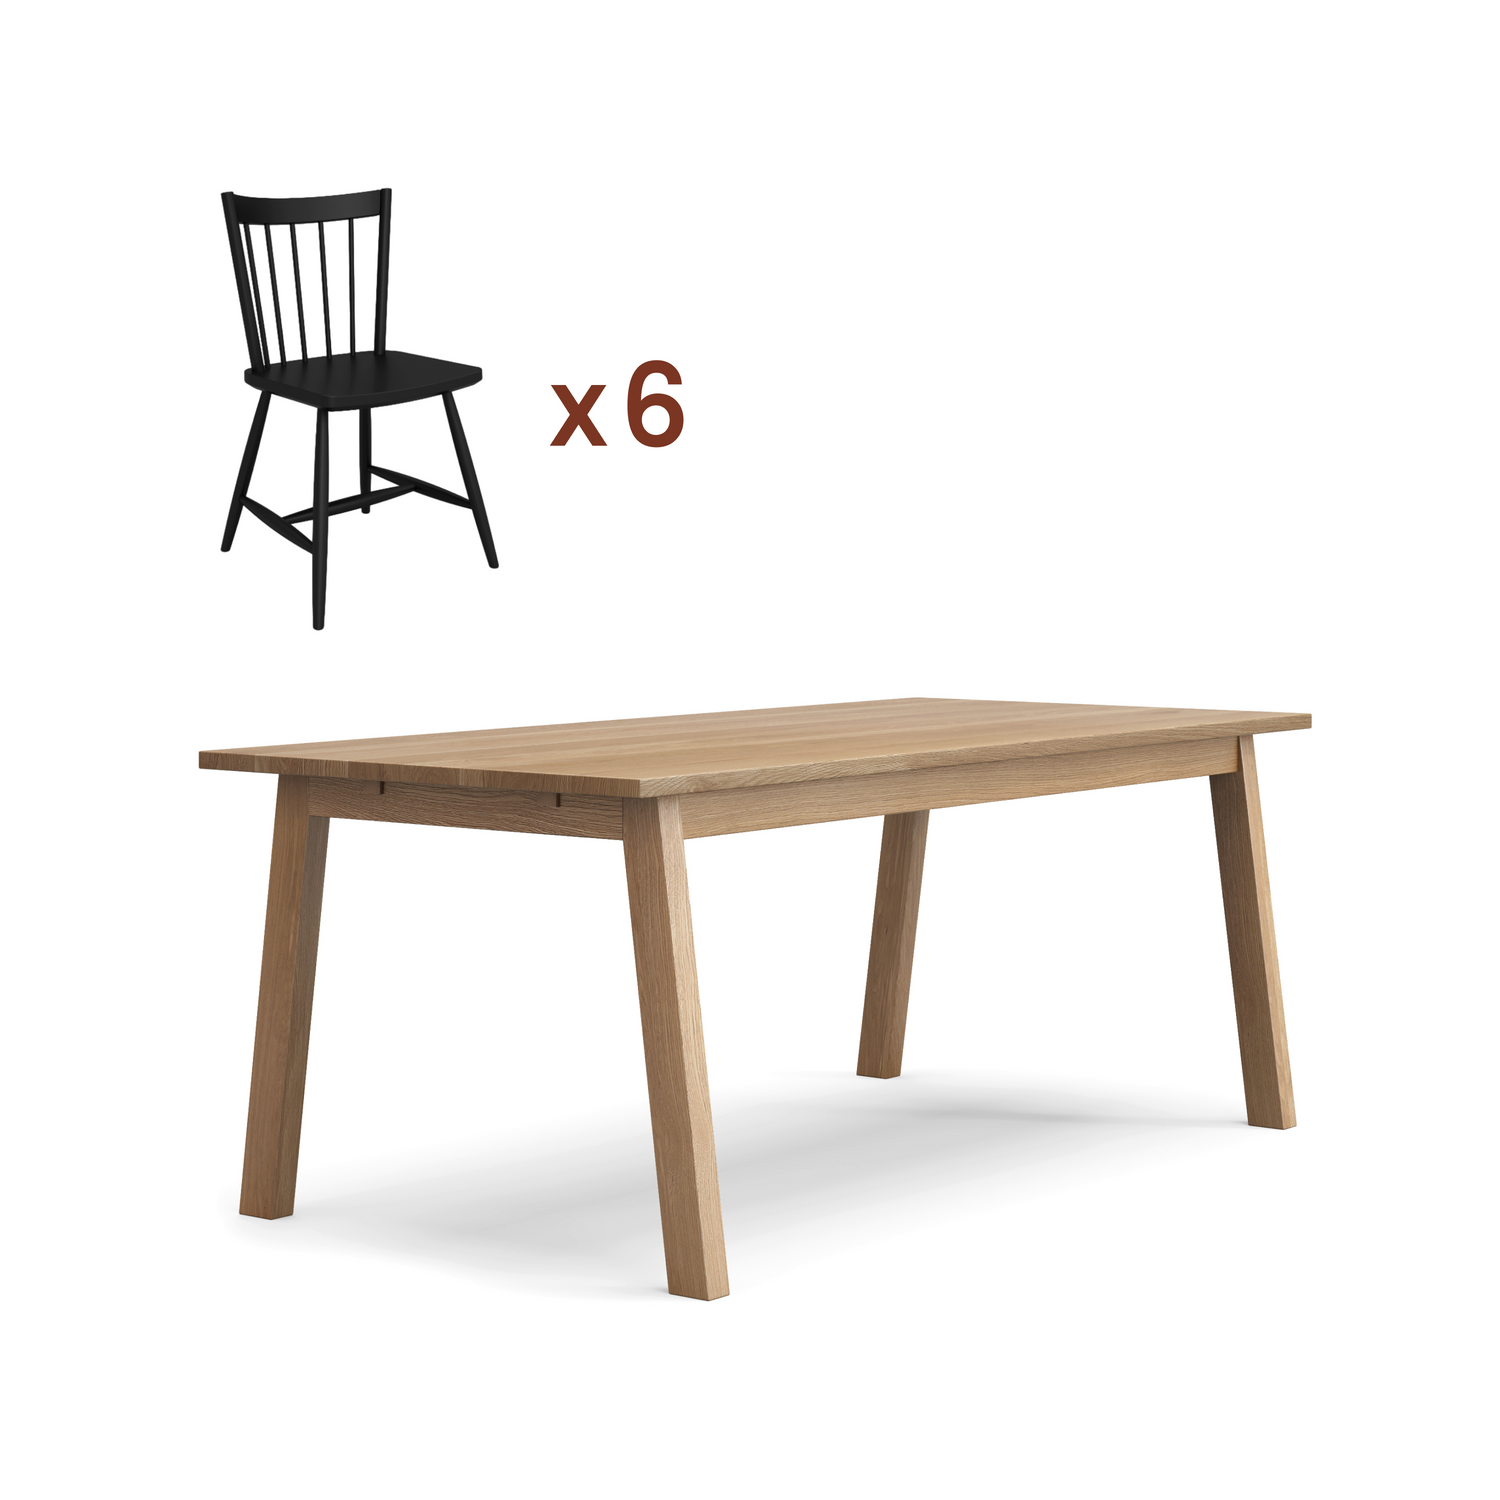 Luft table + chairs bundle